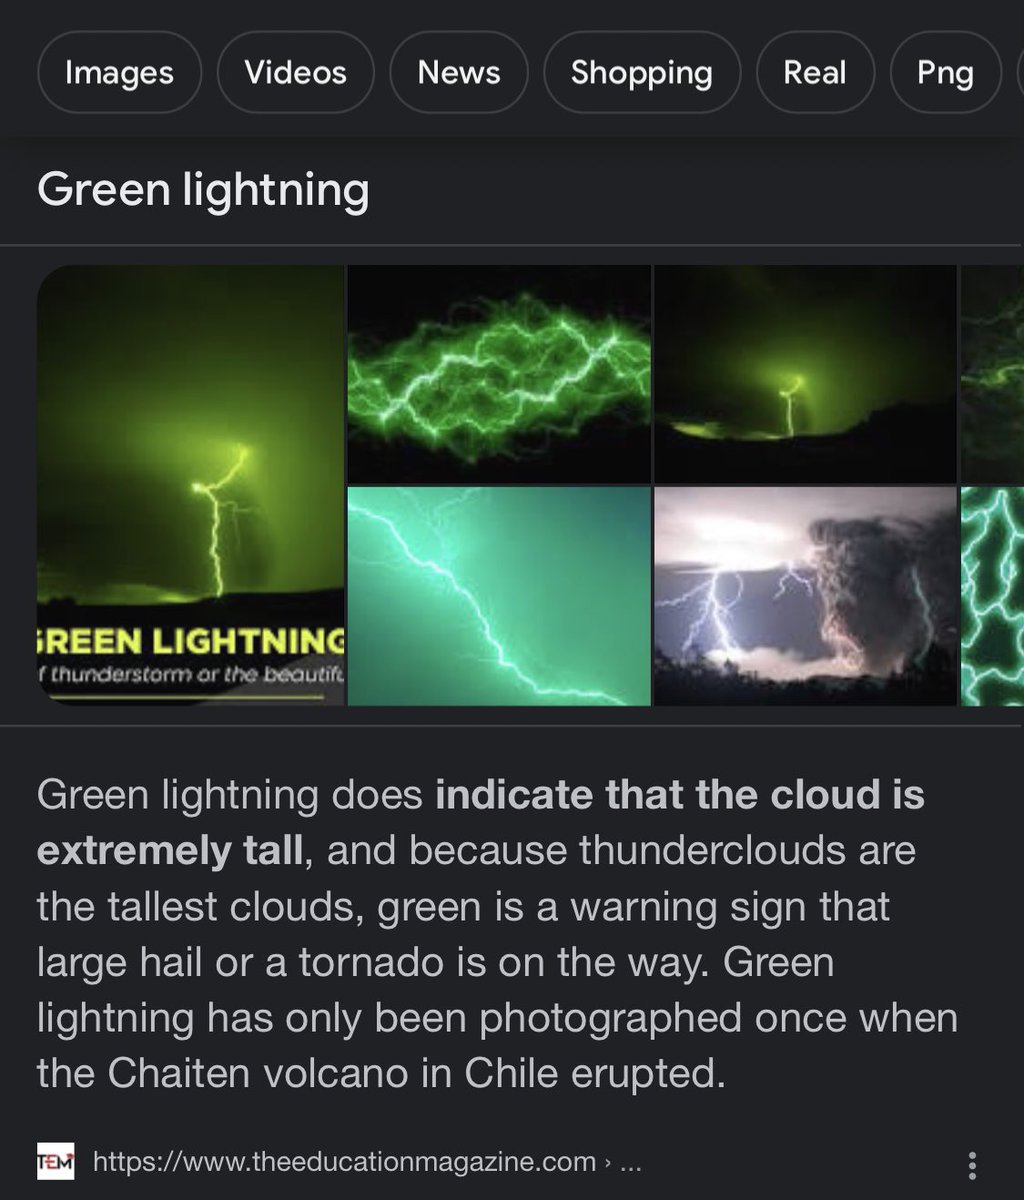 Driving up the 405 north and saw green lighting. Never seen that before. Had to google! This is not ur normally rain. #StaySafe #shermanoaks #LARain #LosAngeles #Lightning #Greenlighting #California #flooding 
#Rain #sanfernandovalley